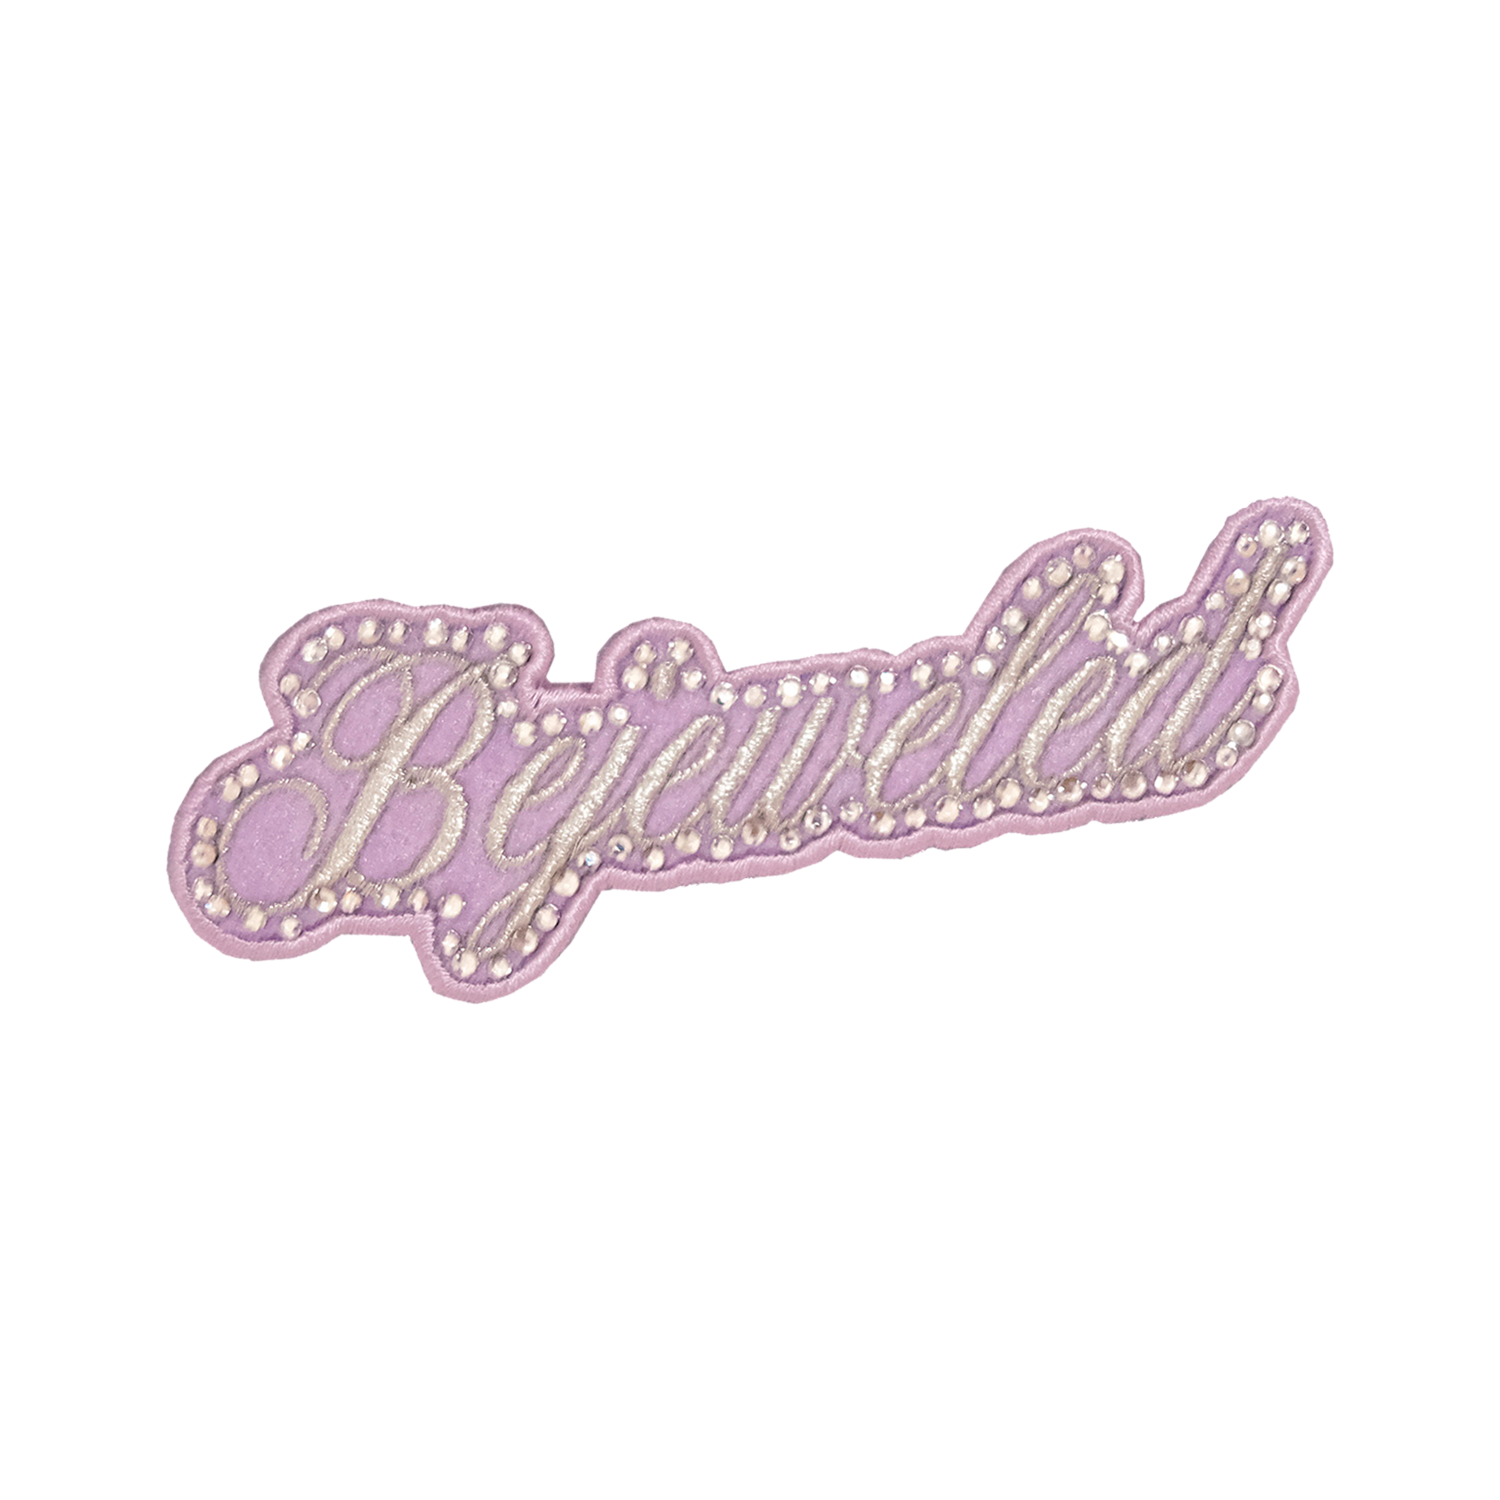 Custom Light Pink Heart Patch Personalized - Daily Disco